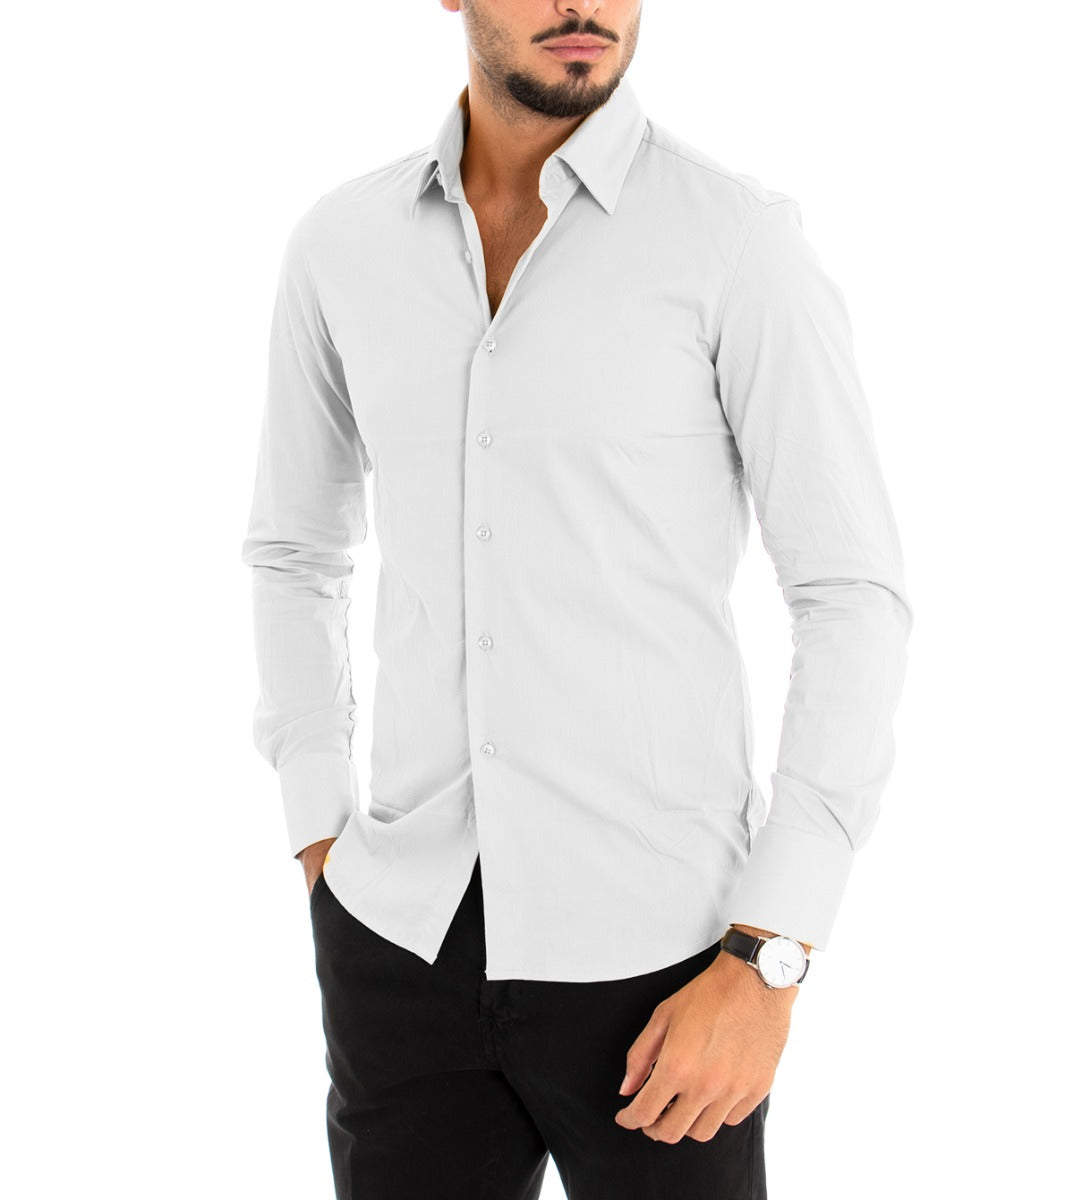 Men's Shirt With Collar Long Sleeve Slim Fit Basic Casual White Cotton GIOSAL-C1811A